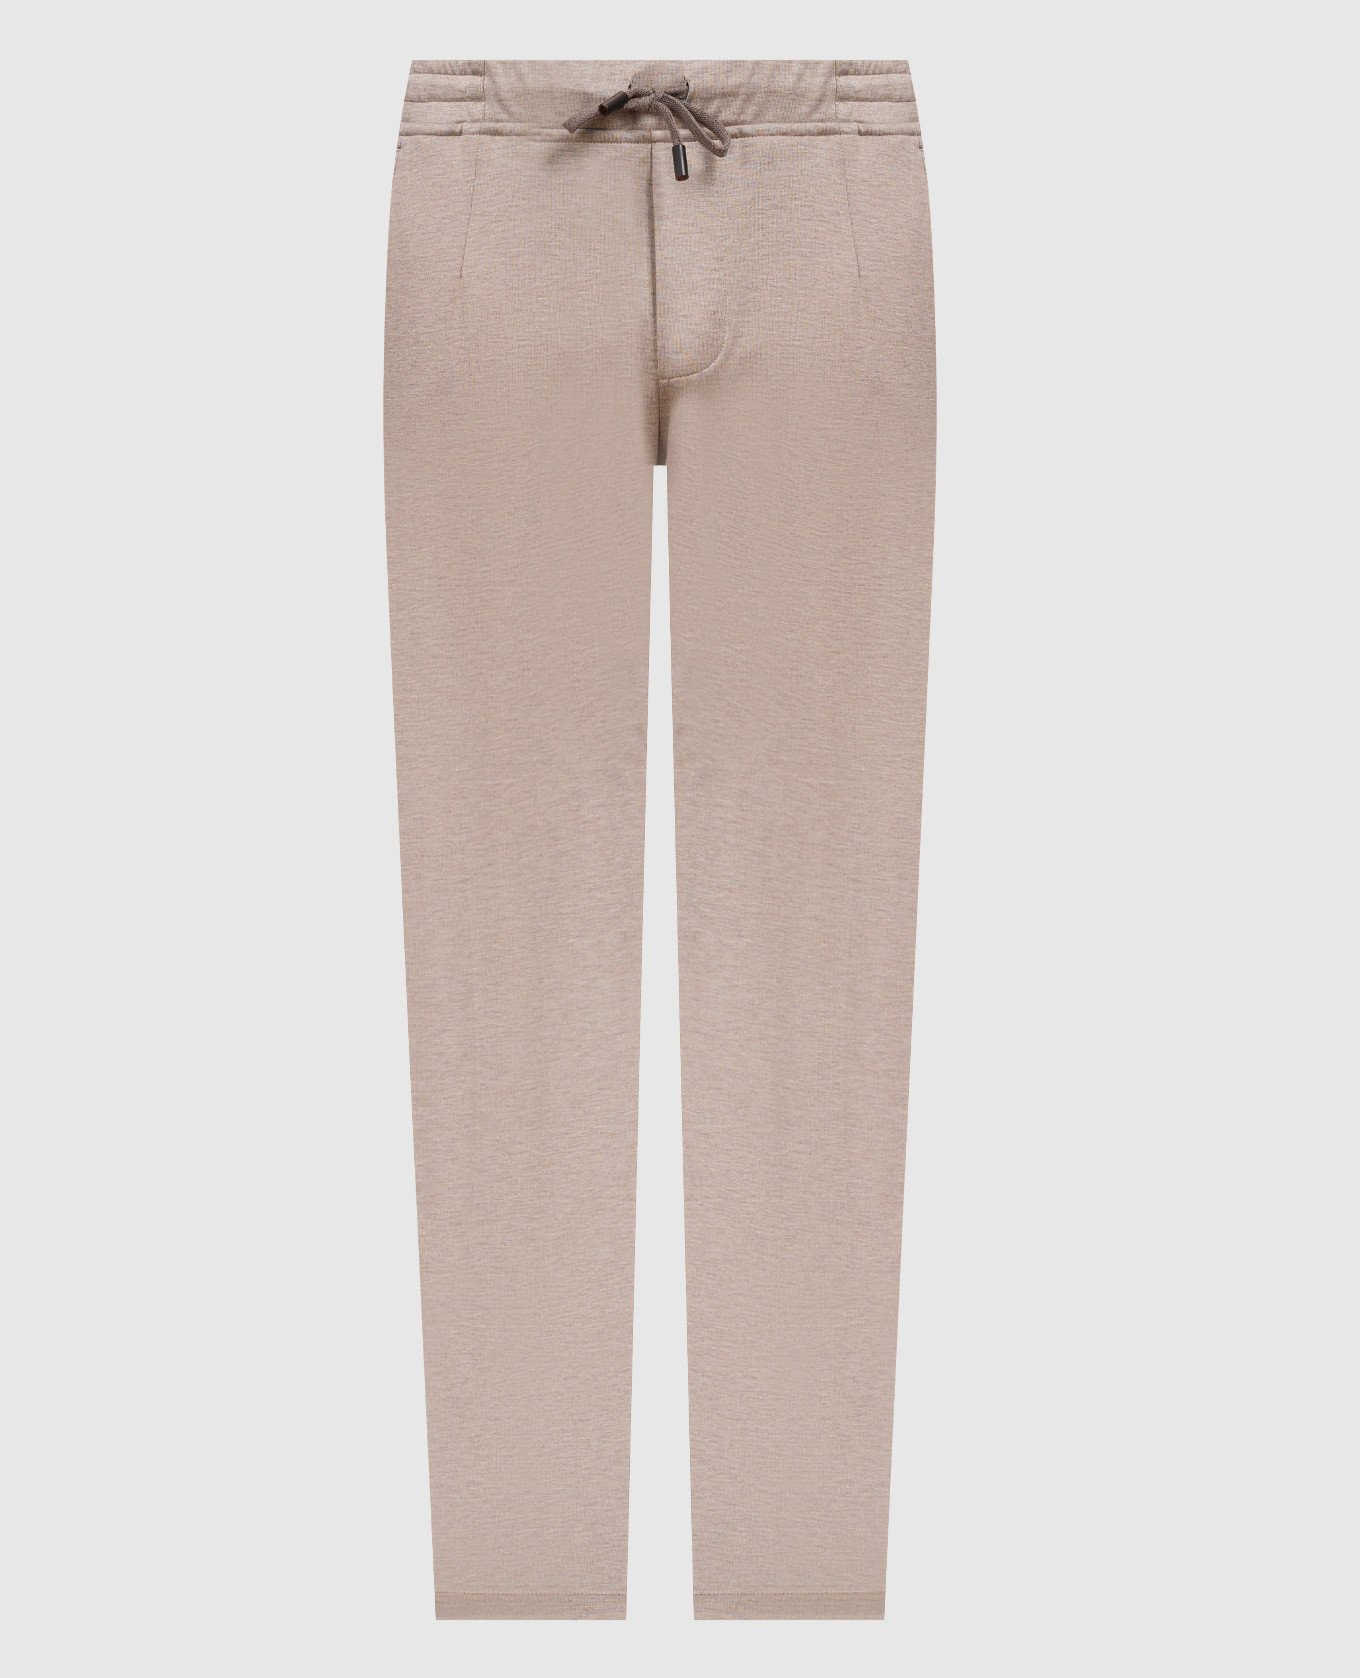 Beige sports pants with silk